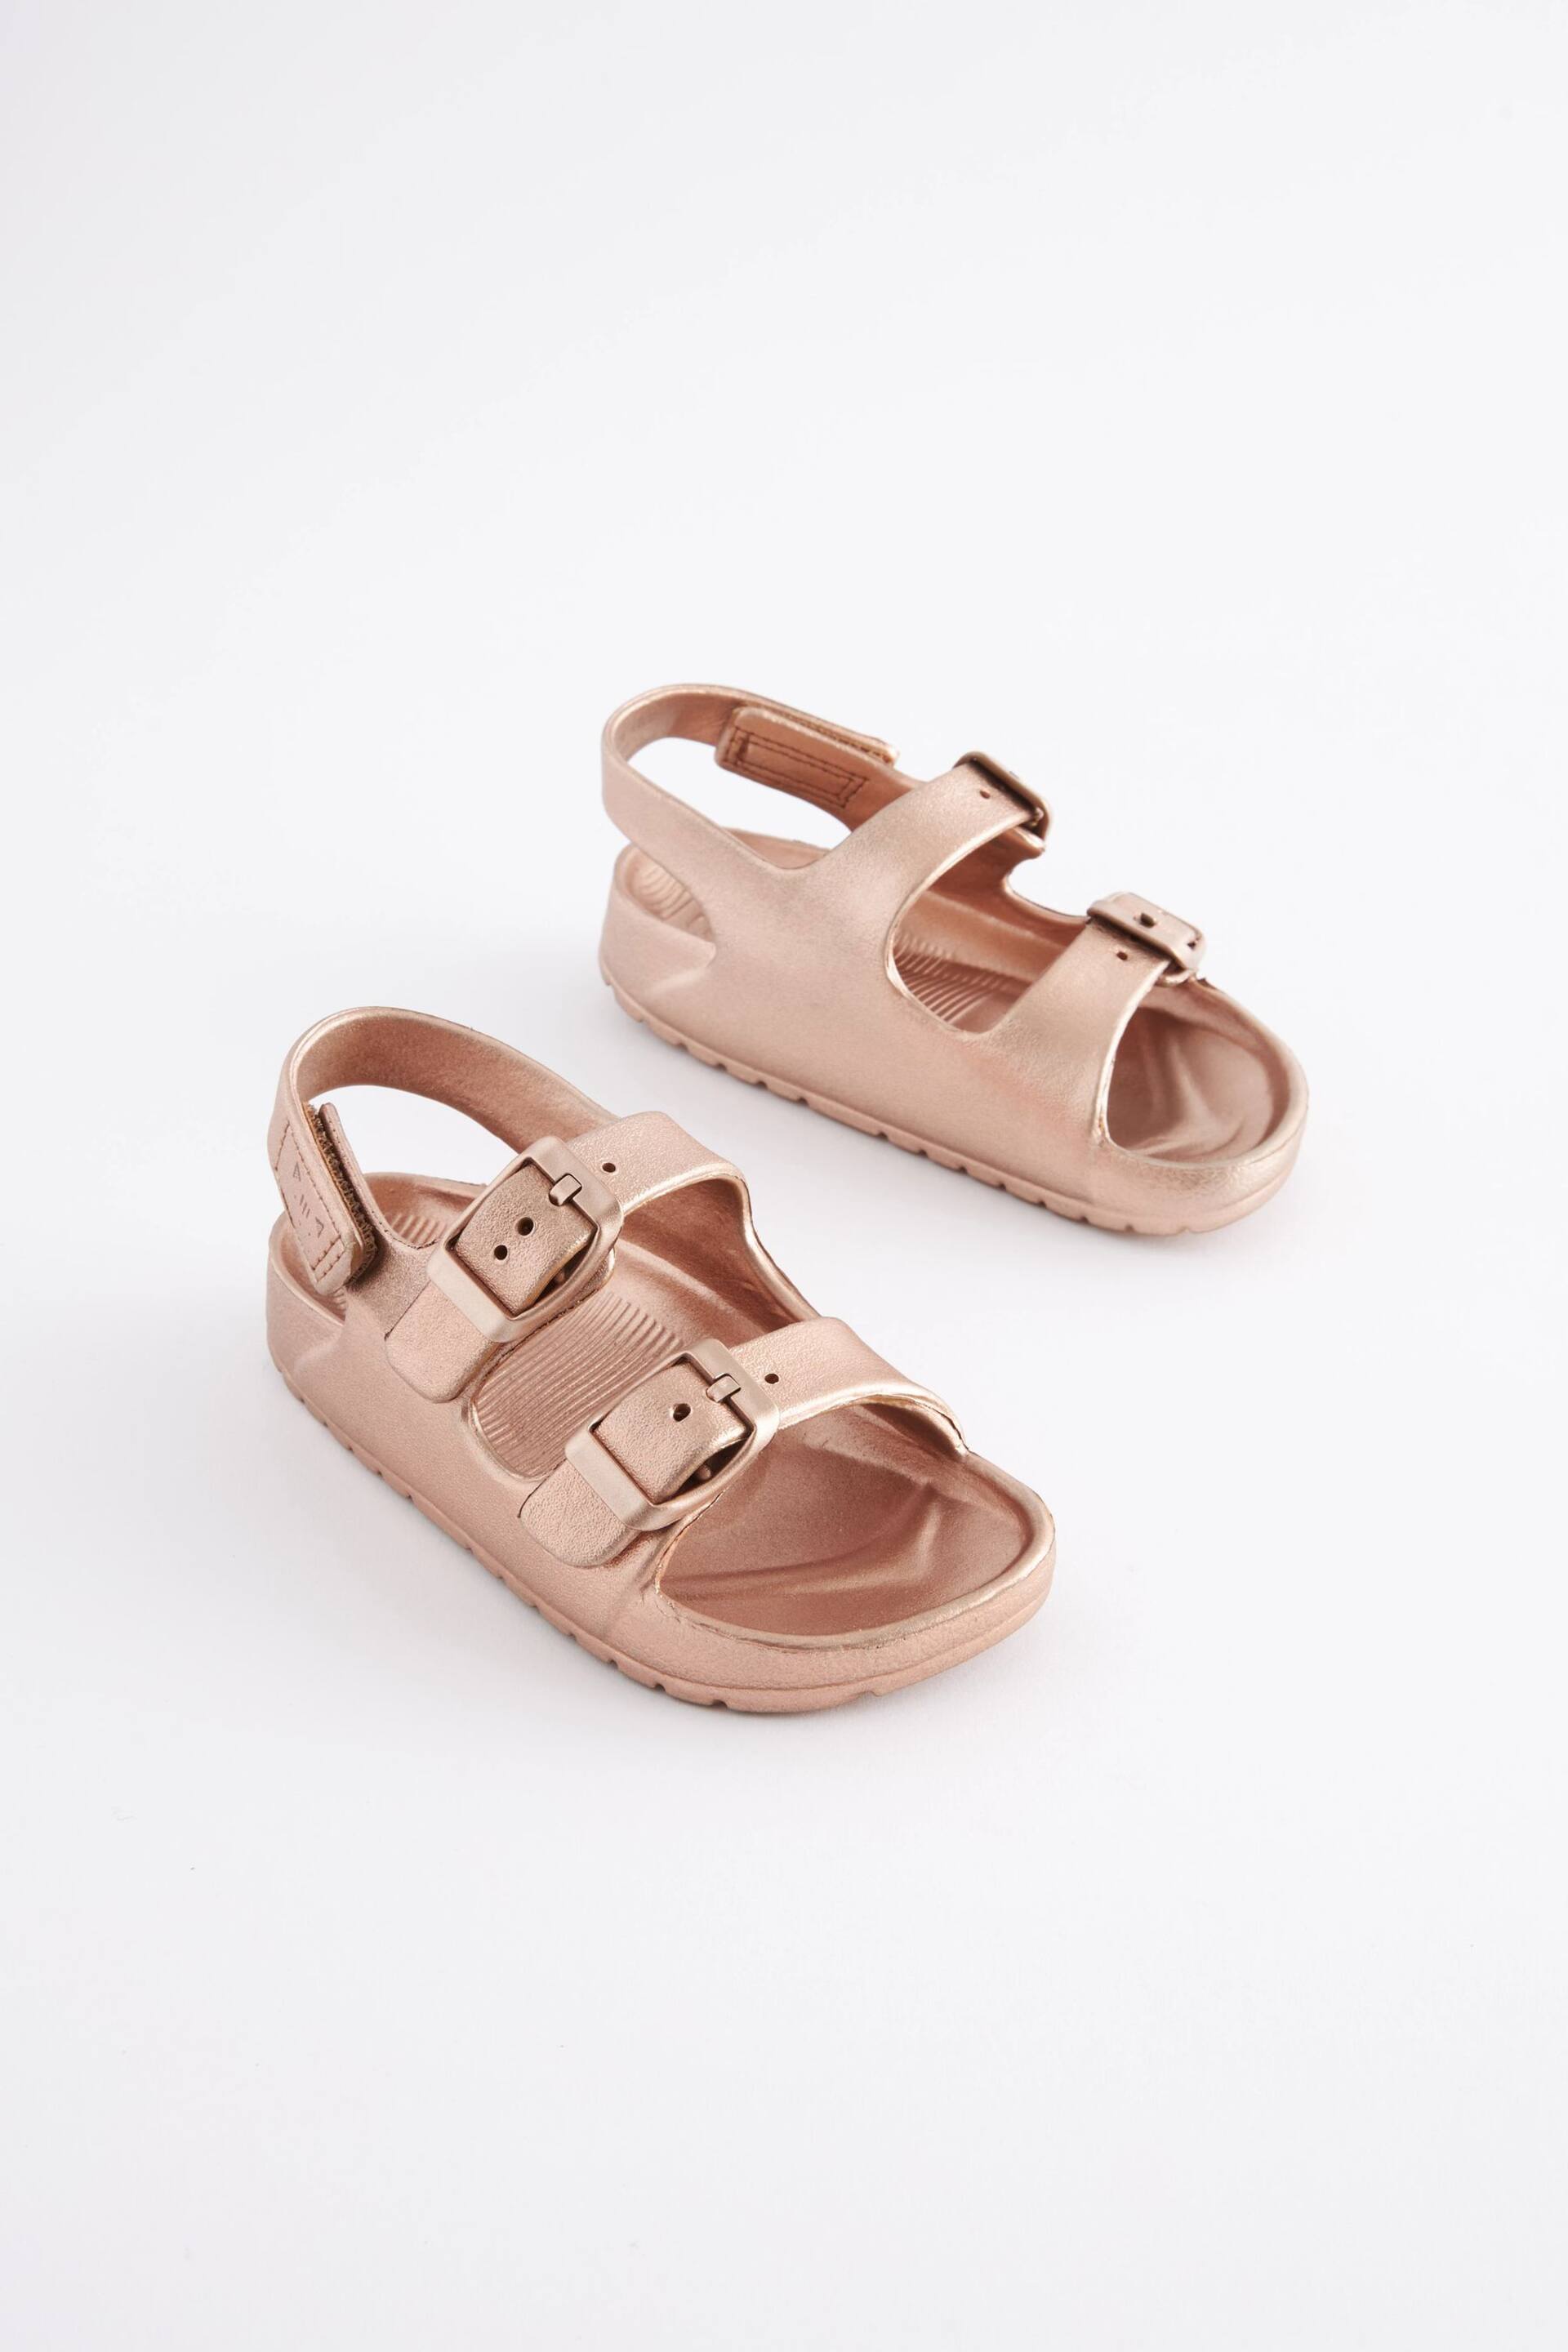 Rose Gold Two Strap Sandals - Image 3 of 6